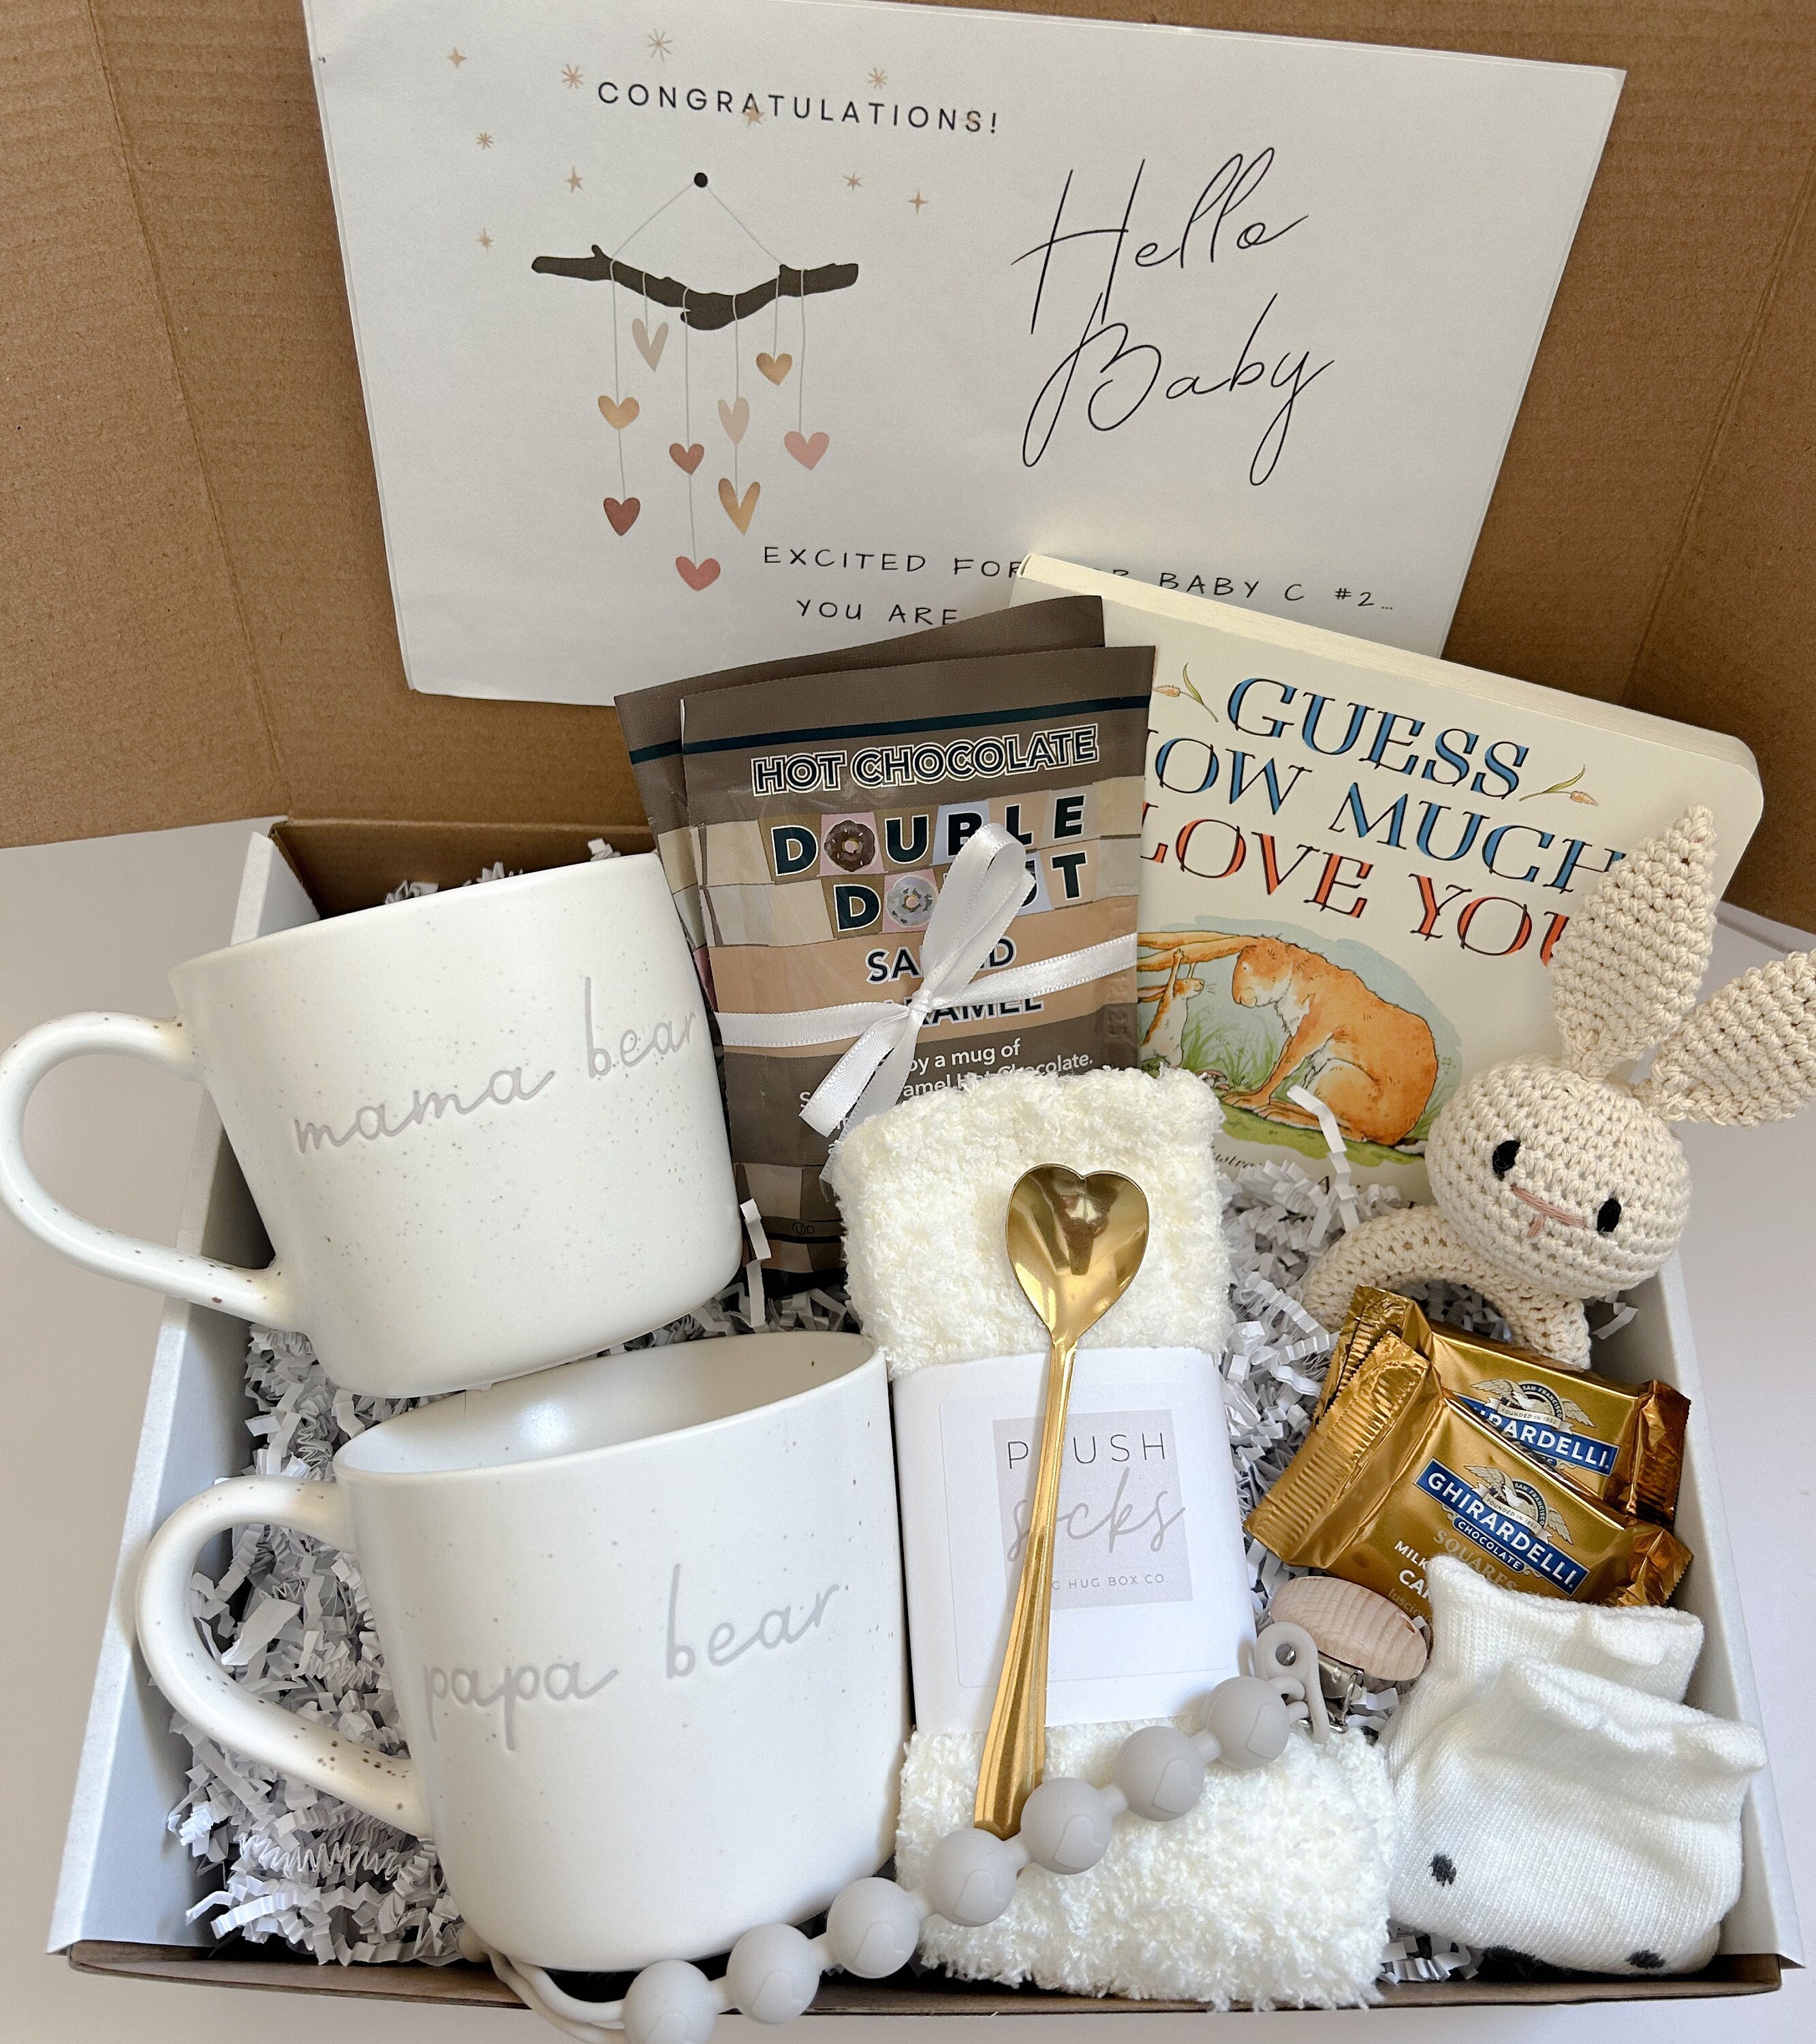  New Parents Gift Set Est 2024 Pregnancy Announcement  Gifts-First Time New Mom Basket for Baby Shower Gender Reveal-Mom & Dad  Mugs, Decision Coin, Baby Ultrasound Frame, Onesie, Bib, Socks 